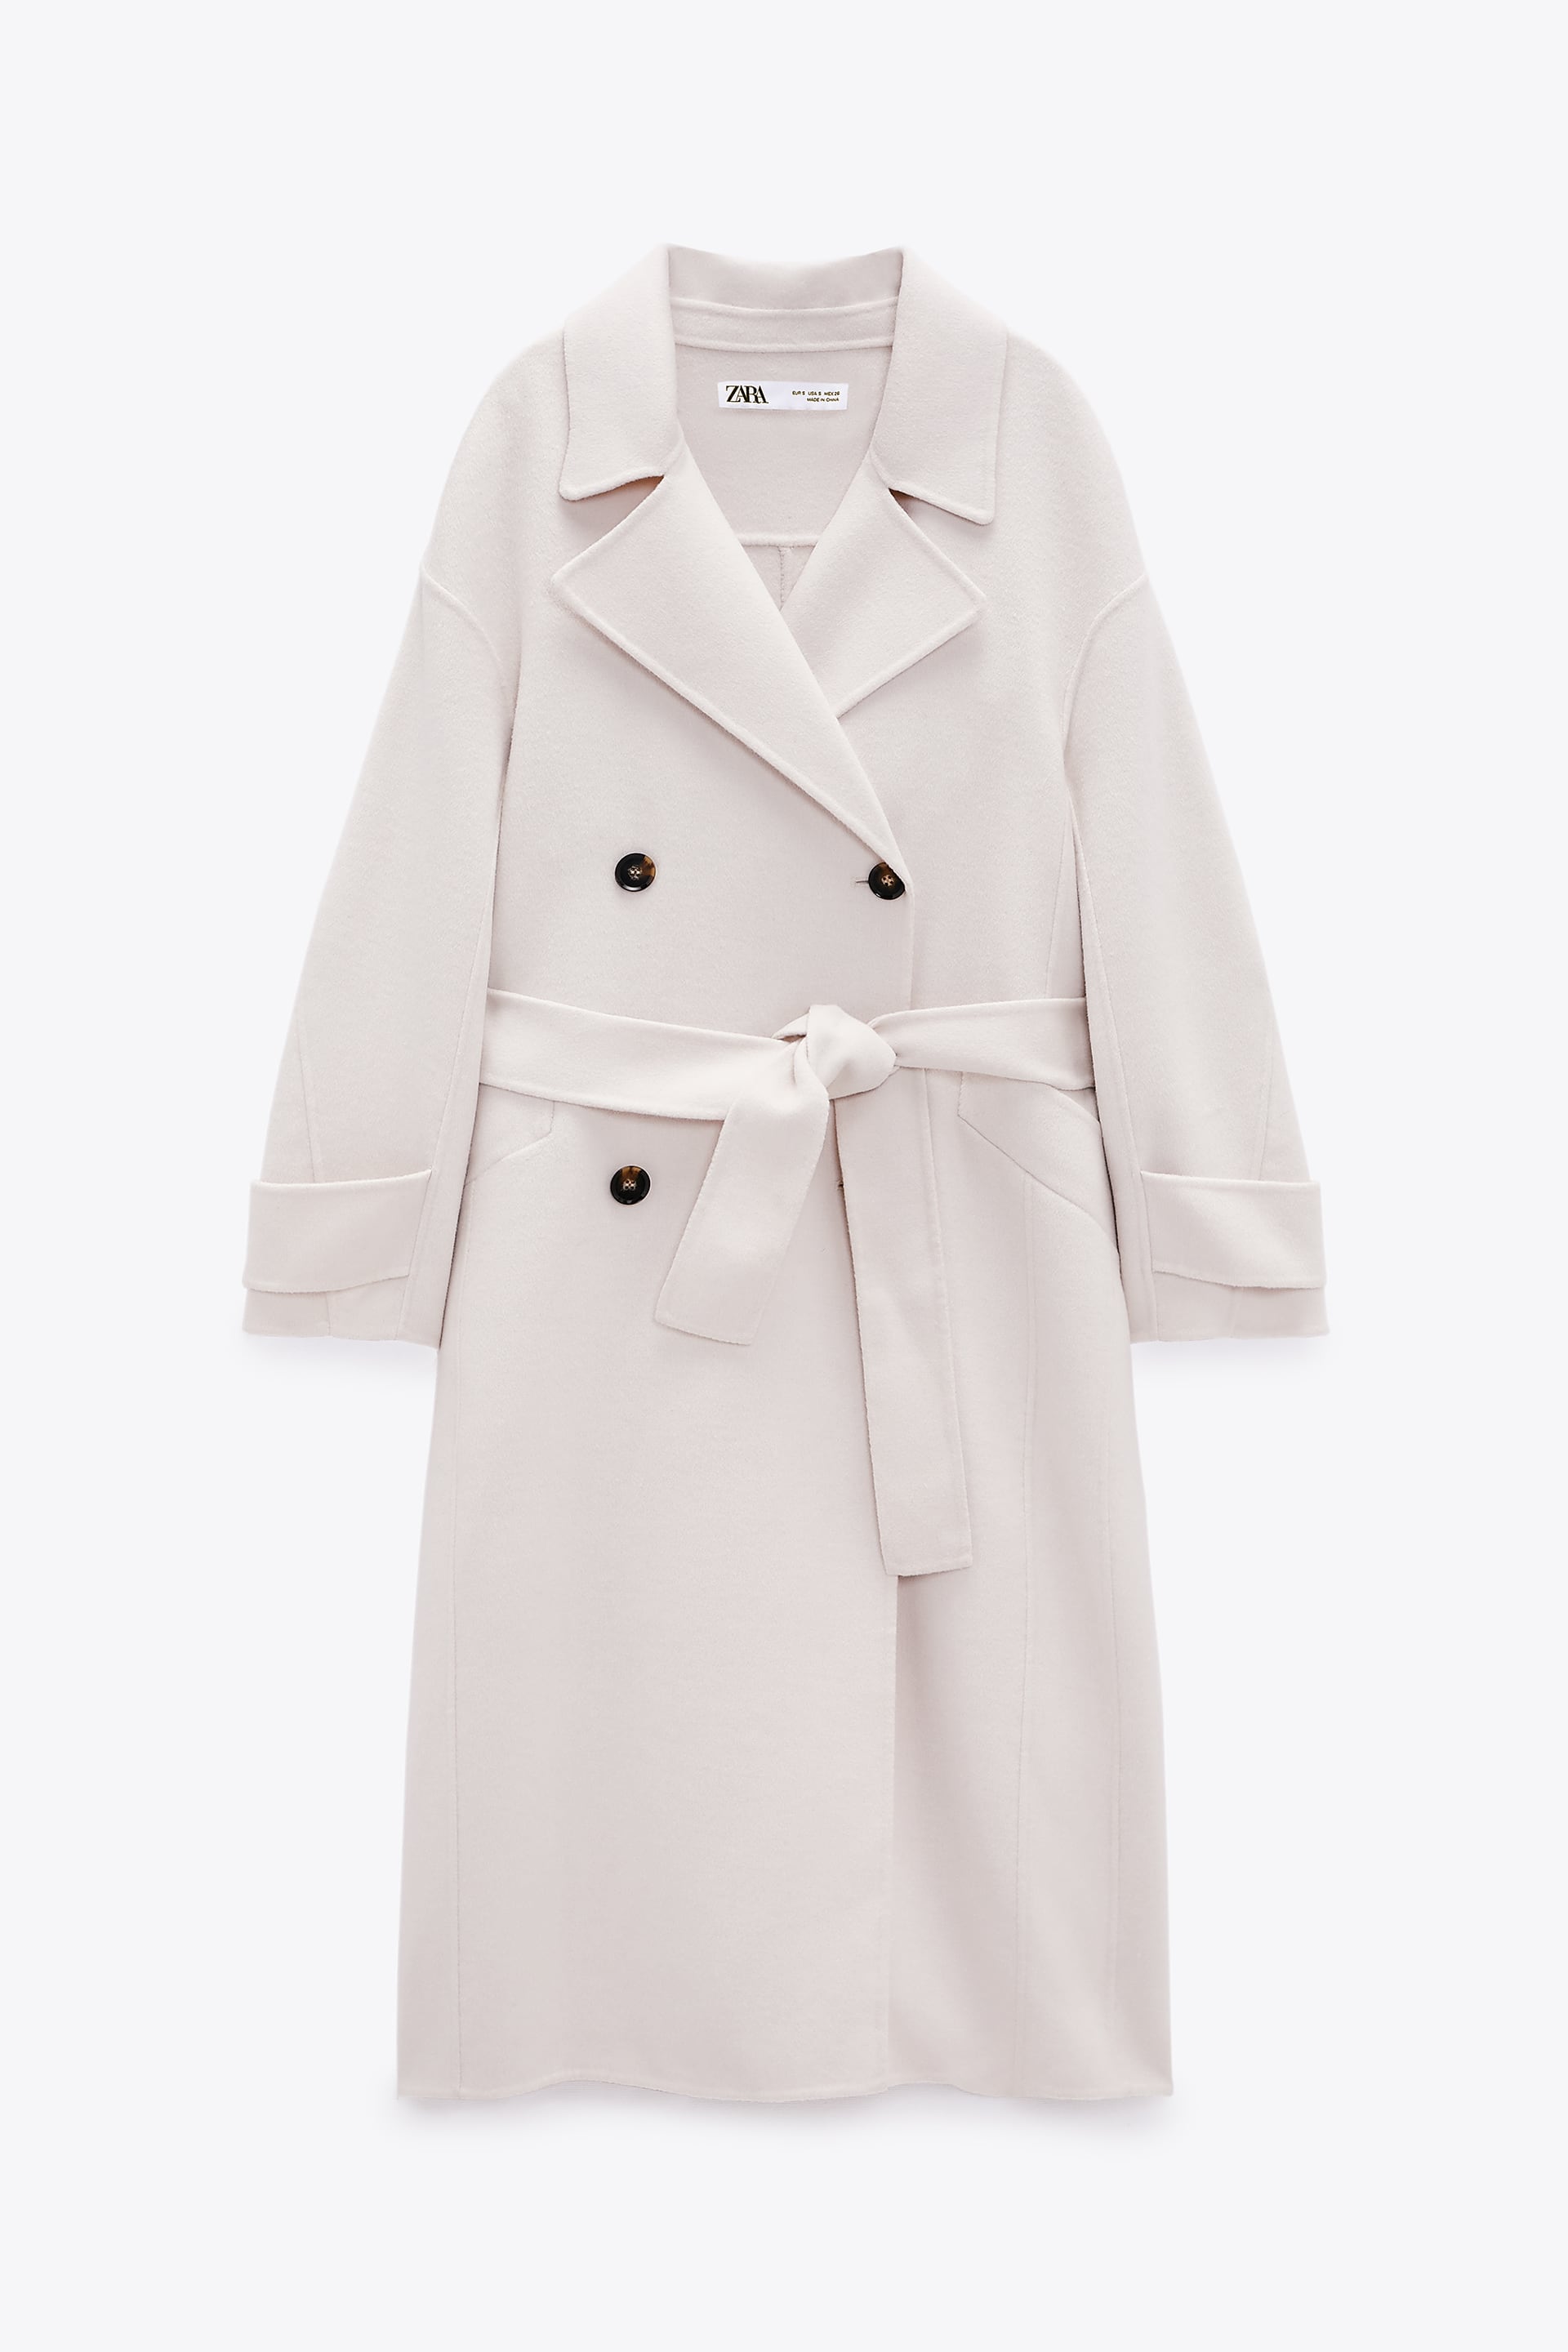 Women Details about ZARA WOMAN DOUBLE-BREASTED LIMITED EDITION TRENCH ...